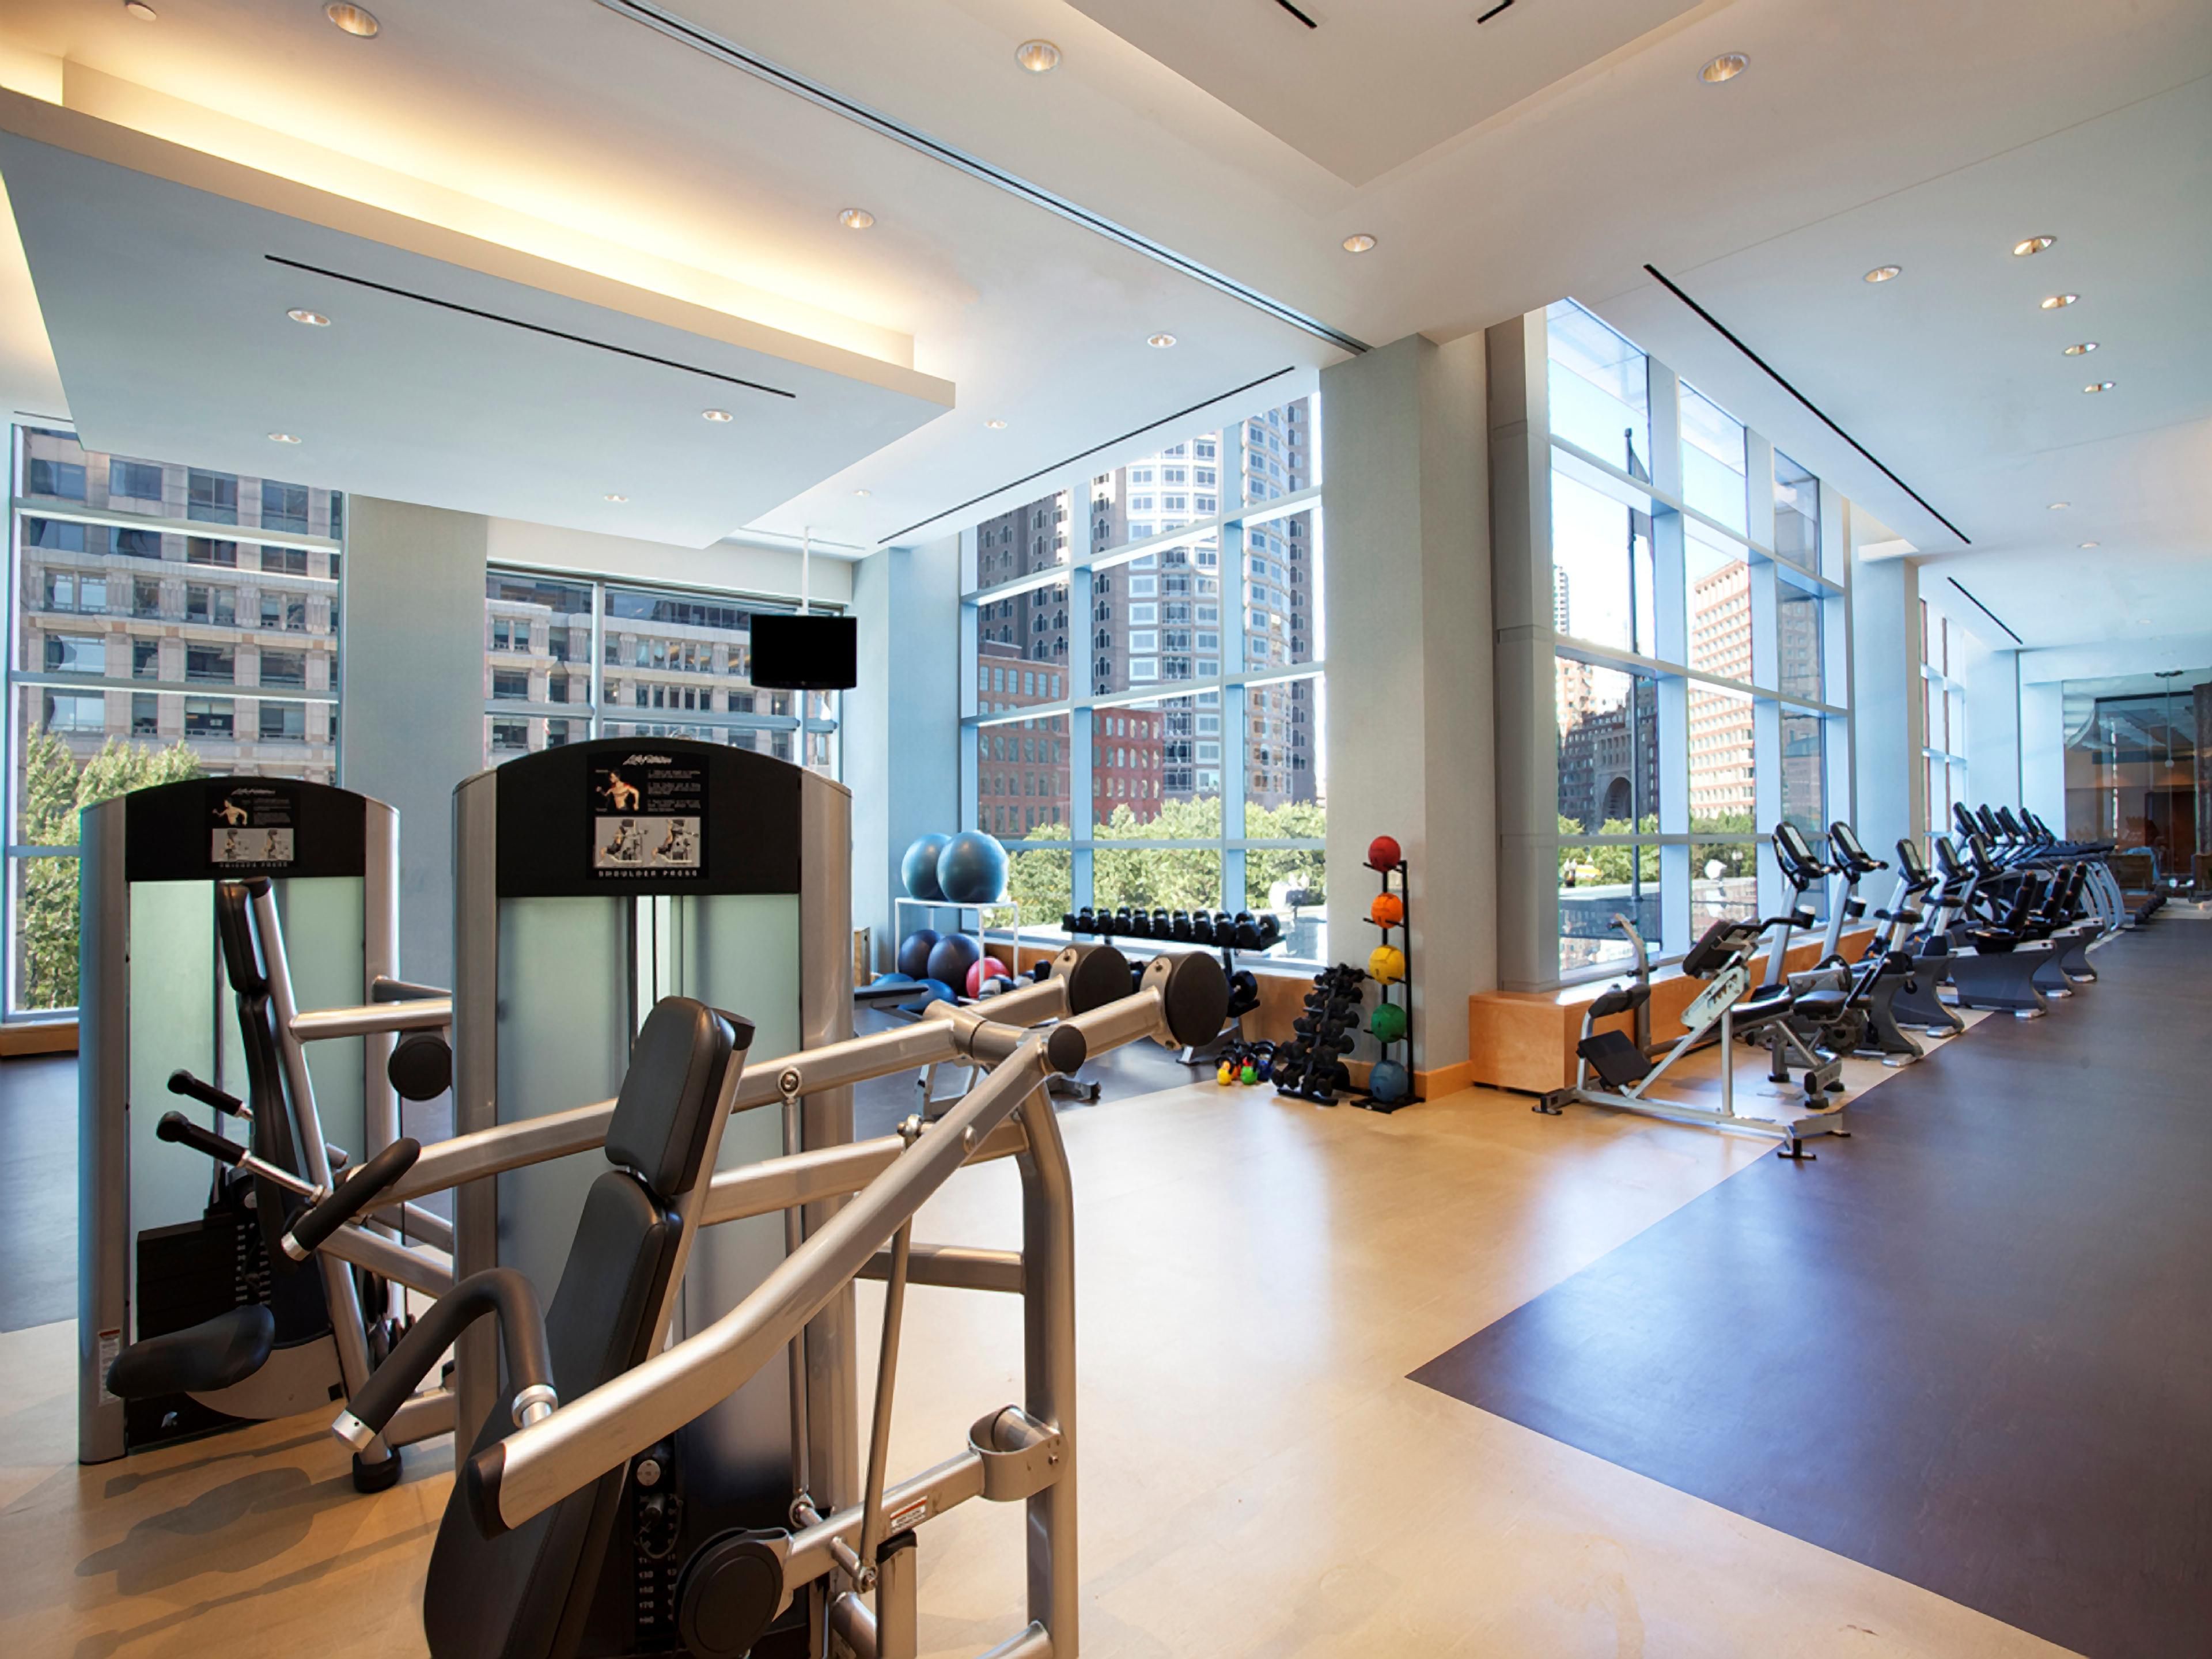 Fitness Center with treadmills, machines, and space to do yoga